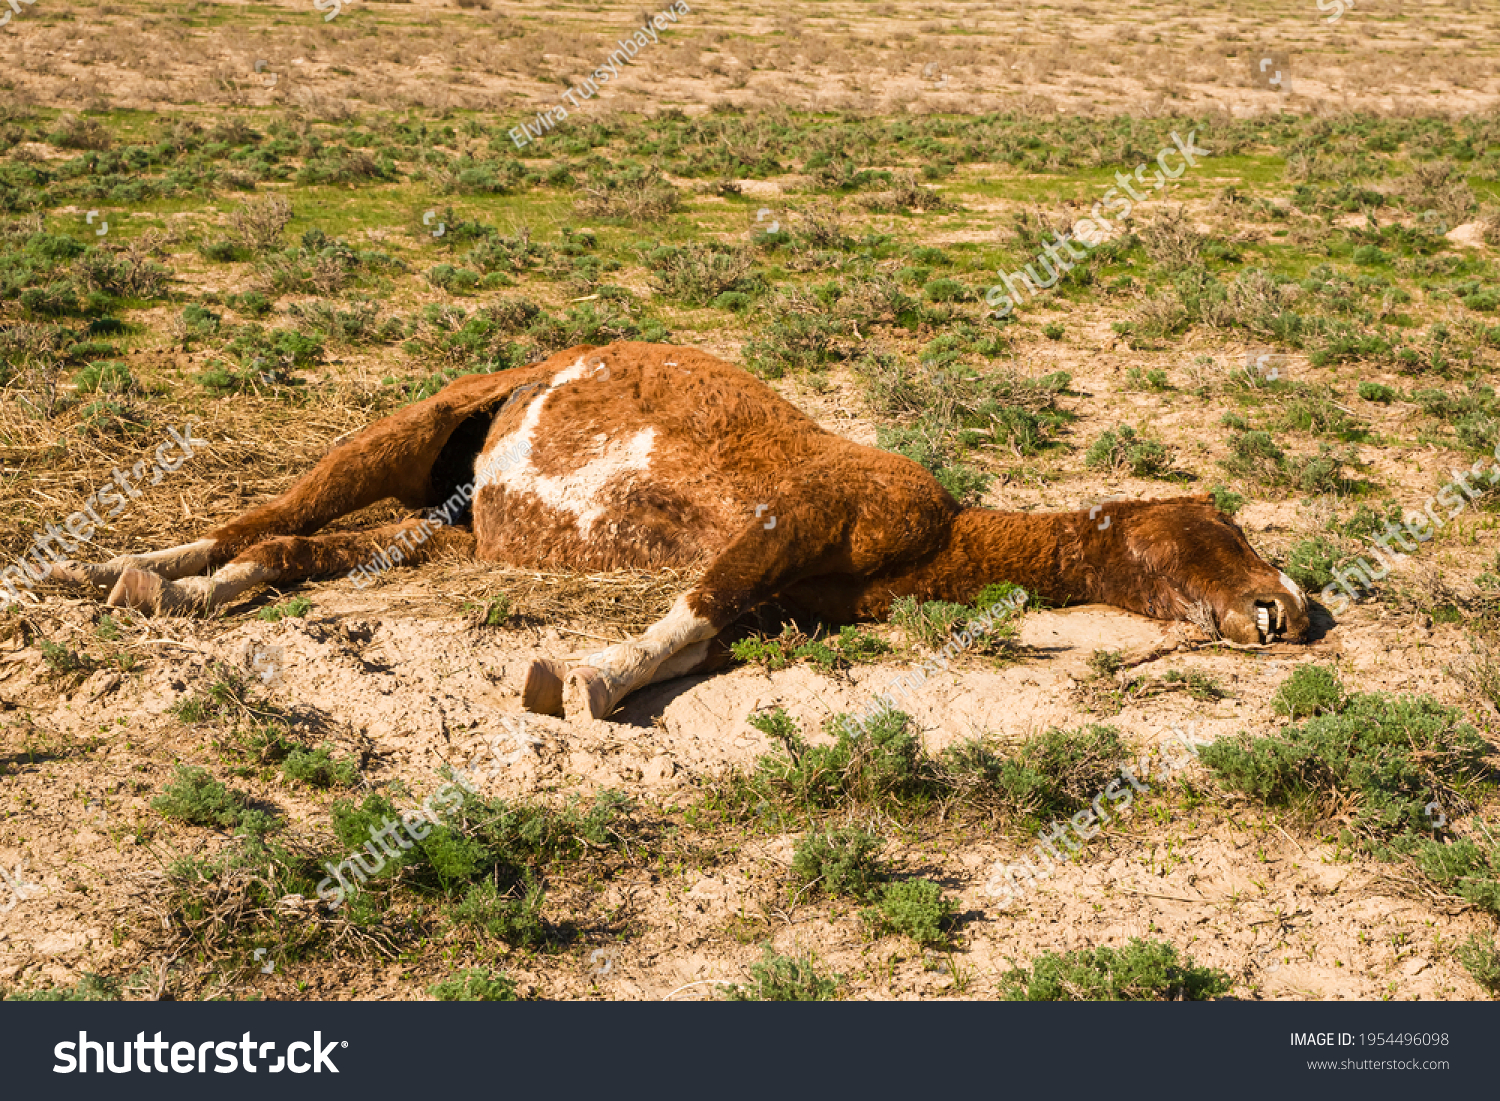 The corpse of a horse in the steppe. Close-up. Dead horse. The horse died in childbirth. The corpse decomposes in the sun. The hoof of an unborn foal. Green grass. Dry land #1954496098